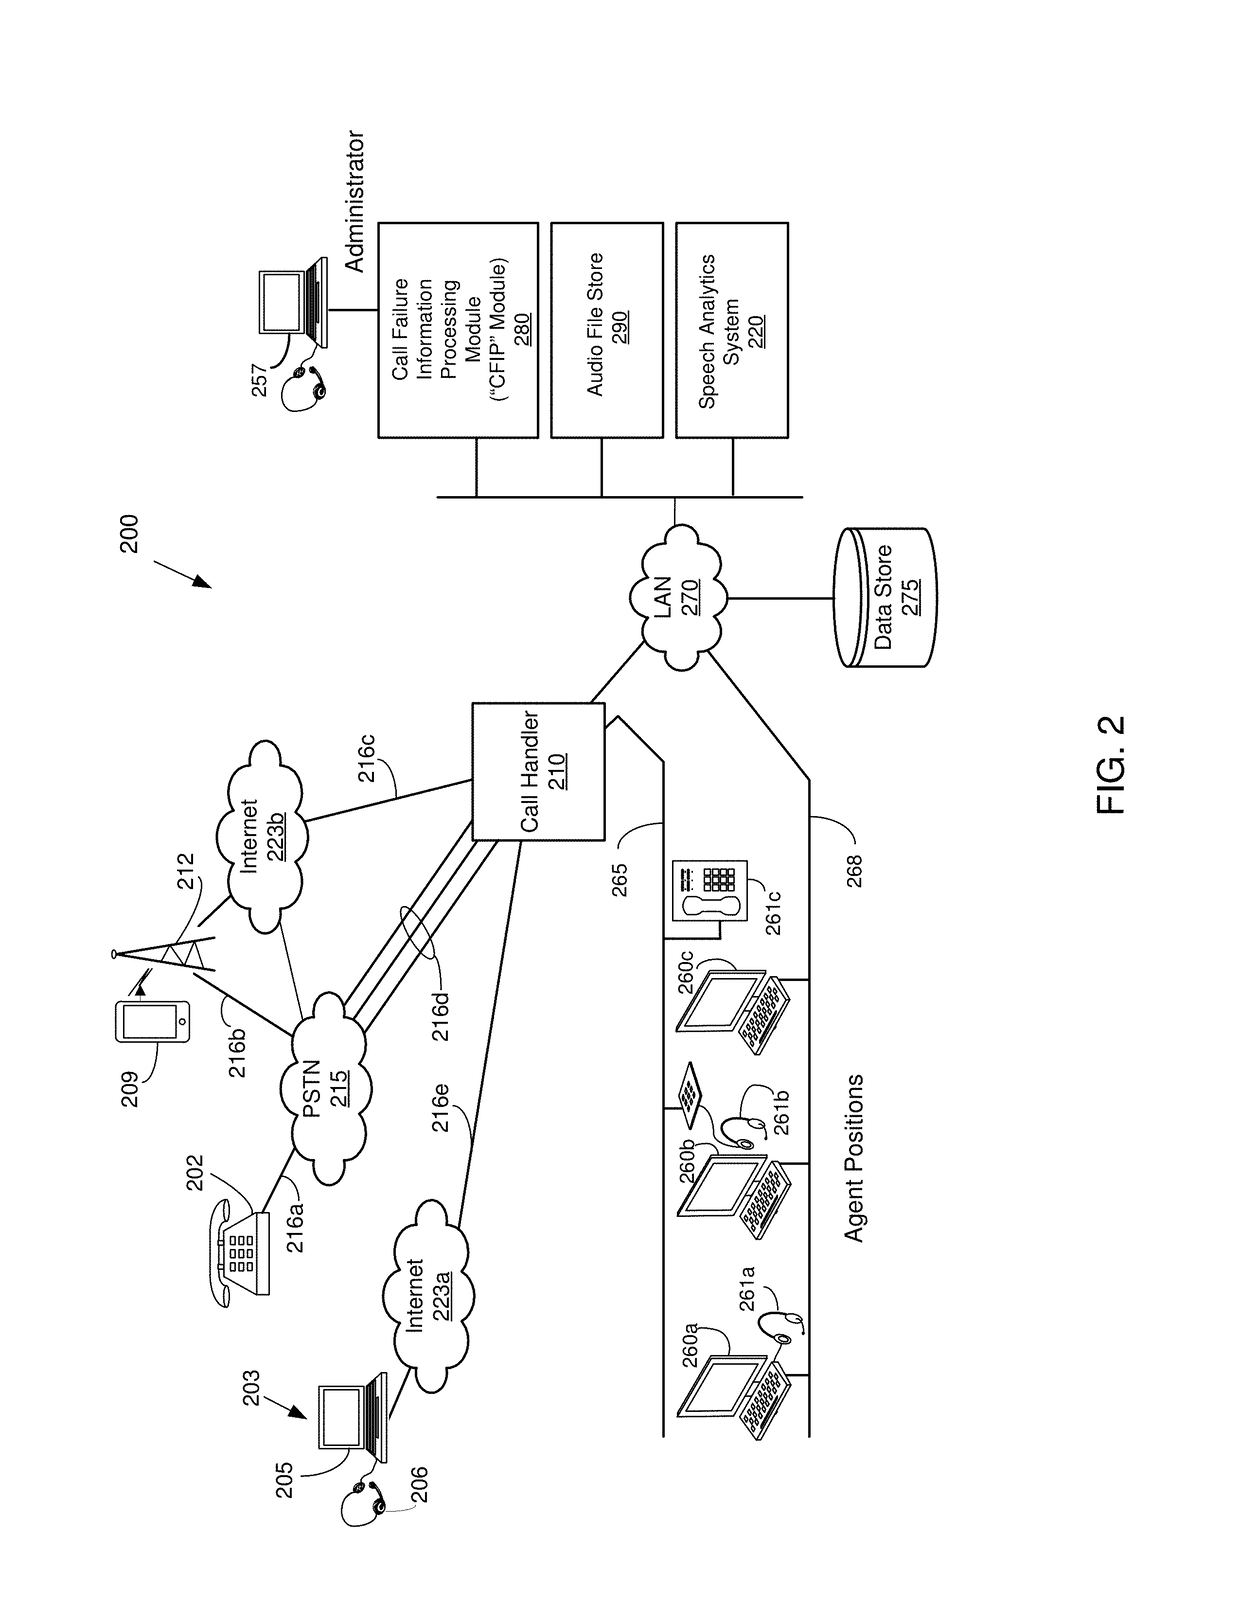 Accurate dispositioning of a telephone call by reconciling cause codes with in-band audio information